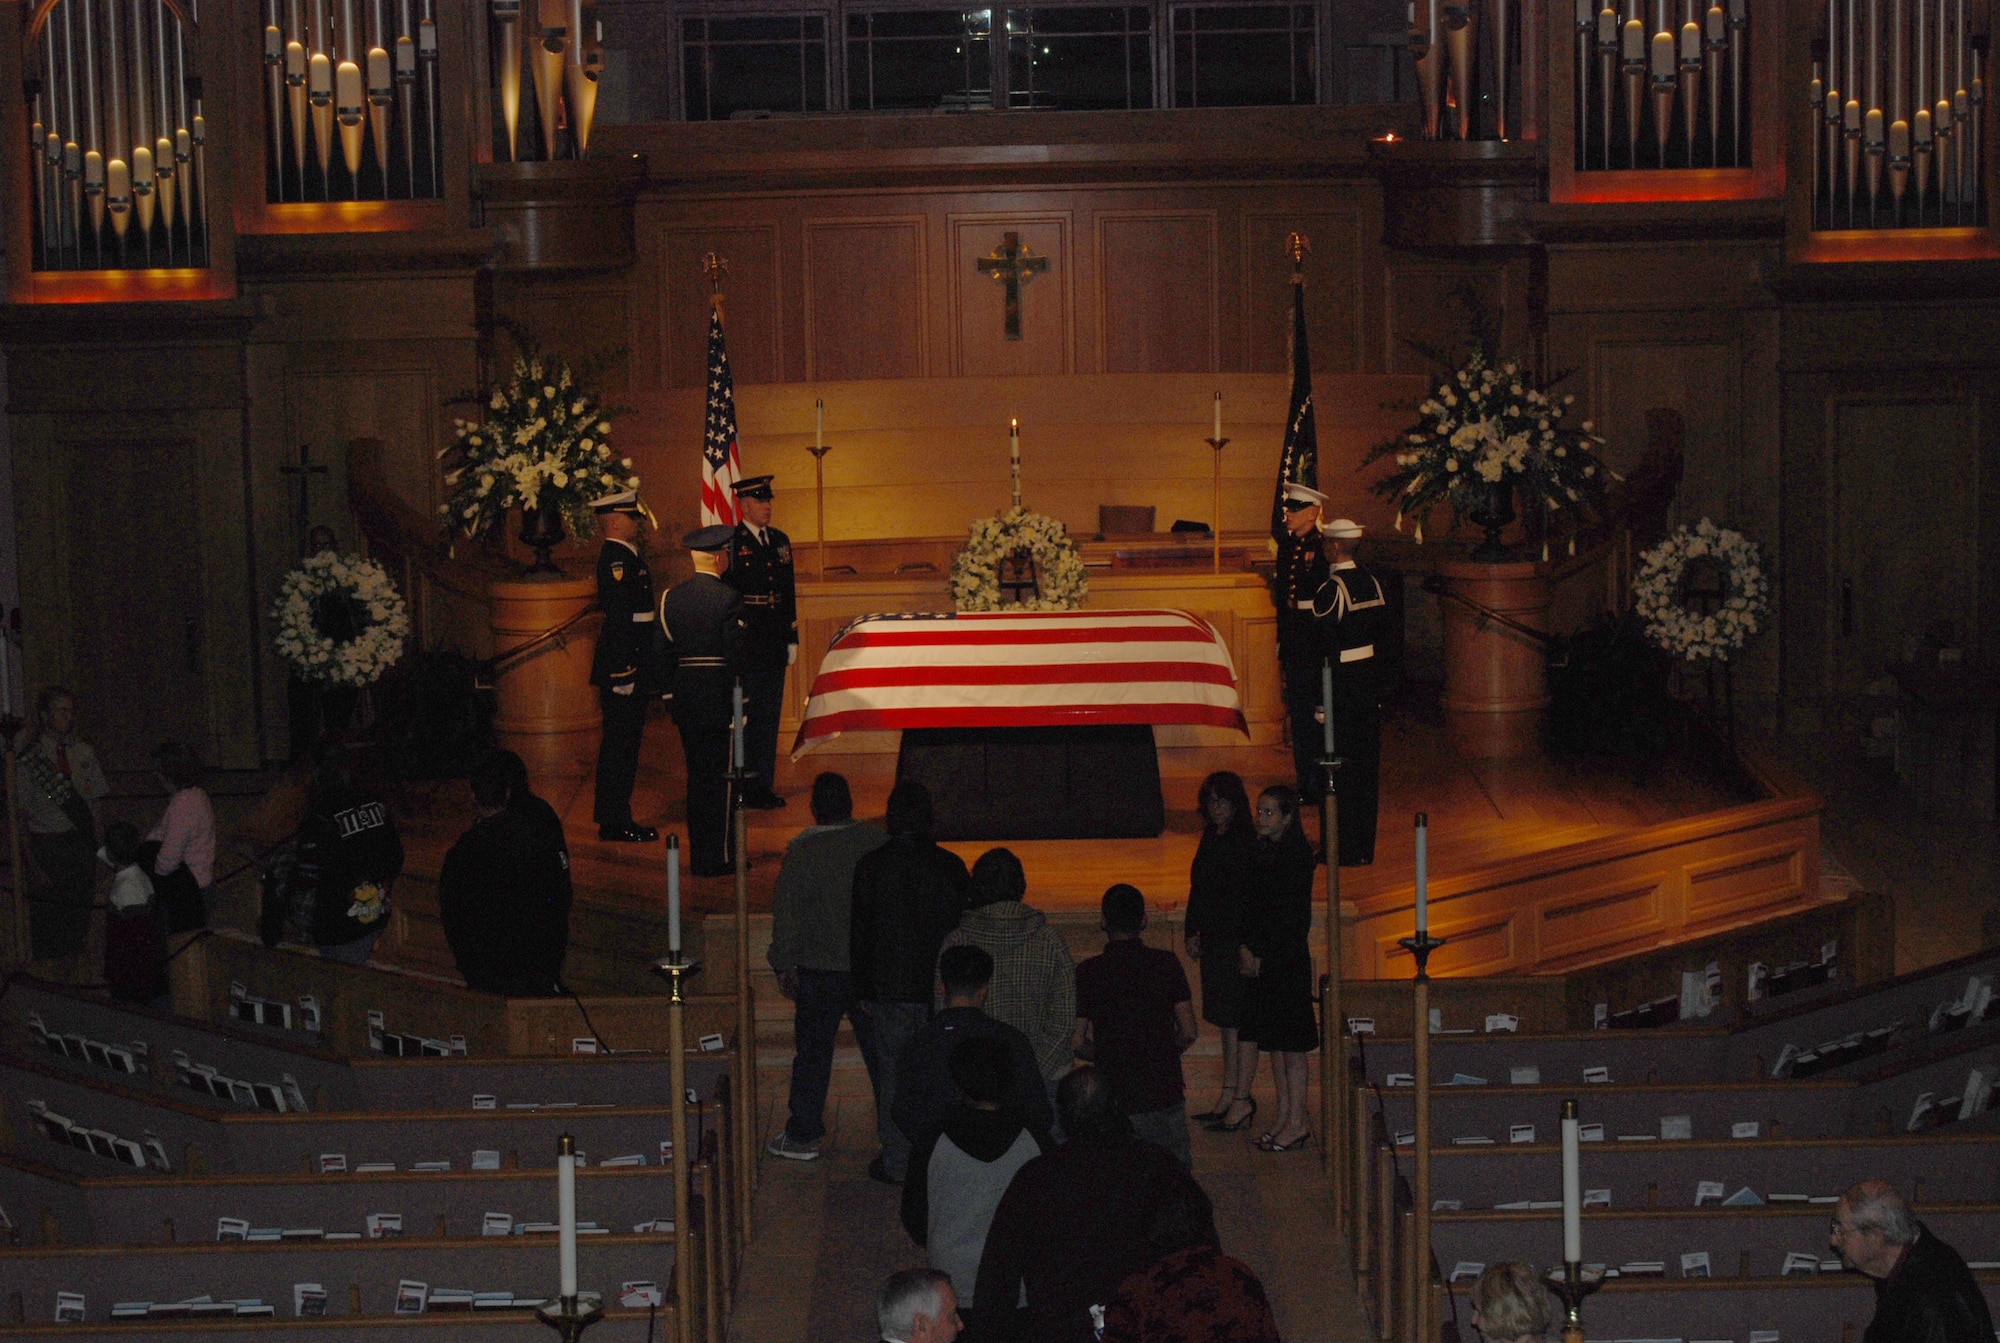 Former President Gerald R. Ford lies in repose at St. Margaret's Episcopal Church in Palm Desert, California, as the Guard of Honor stands watch.  More than 500 military members are in Palm Desert supporting the California portion of the State Funeral for the former president. The military is providing ceremonial, logistics, and security support to honor and pay tribute to the former Commander-in-Chief and the Ford family. Ford died in Palm Desert, California, Dec. 26 at the age of 93. (U.S. Air Force Photo/1st Lt Carrie L. Kessler)